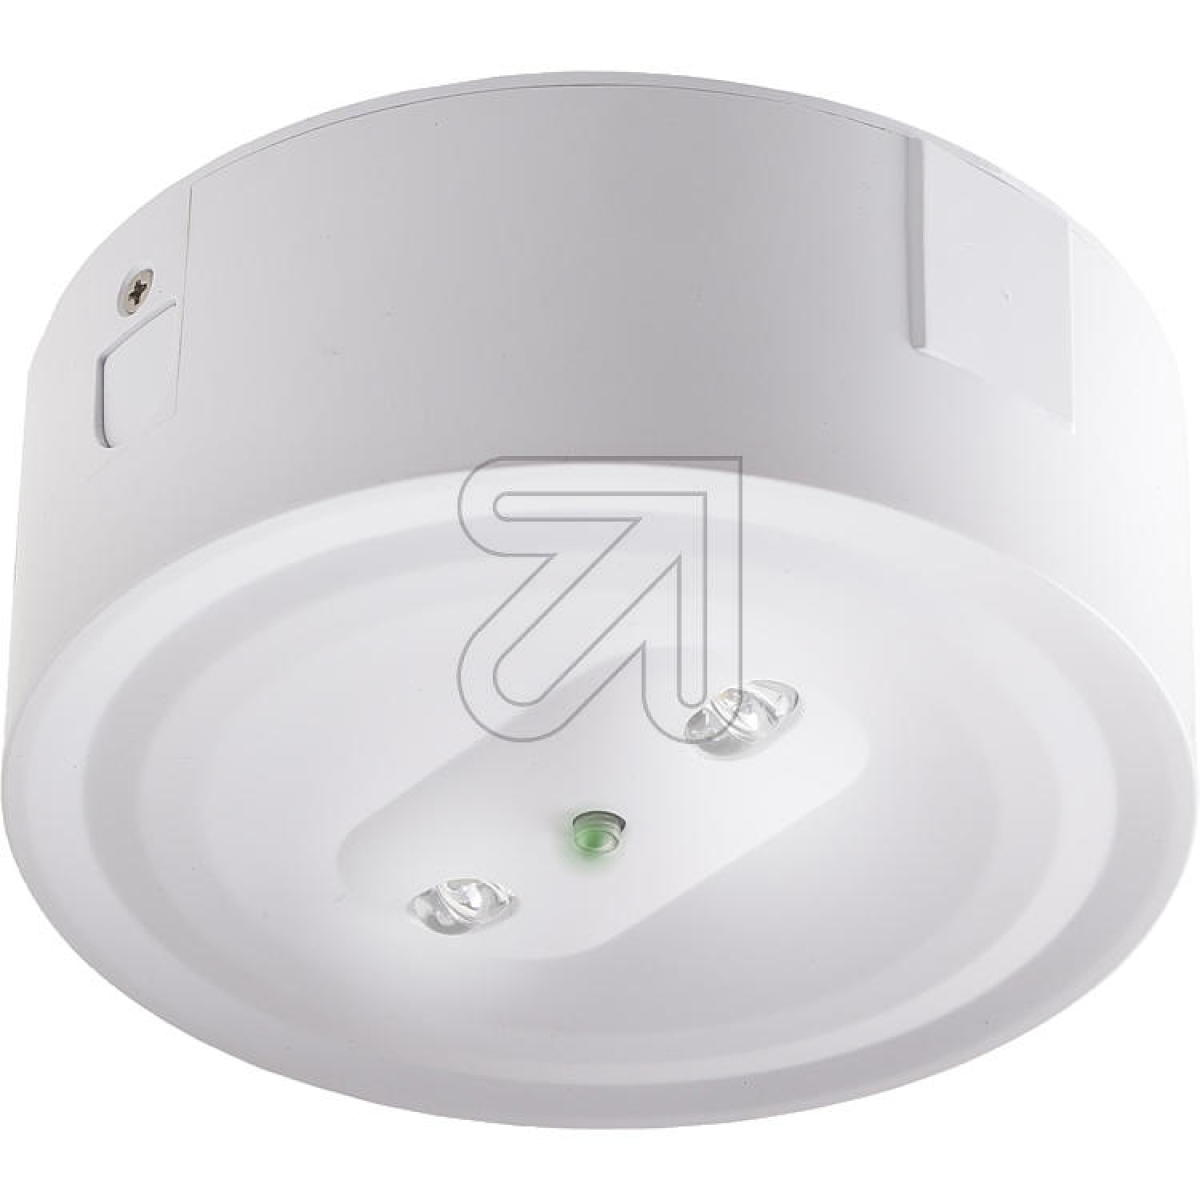 ABBLED surface-mounted emergency light 4.8W SM100ST PrimEvo, 7TCA091720R0193Article-No: 664510